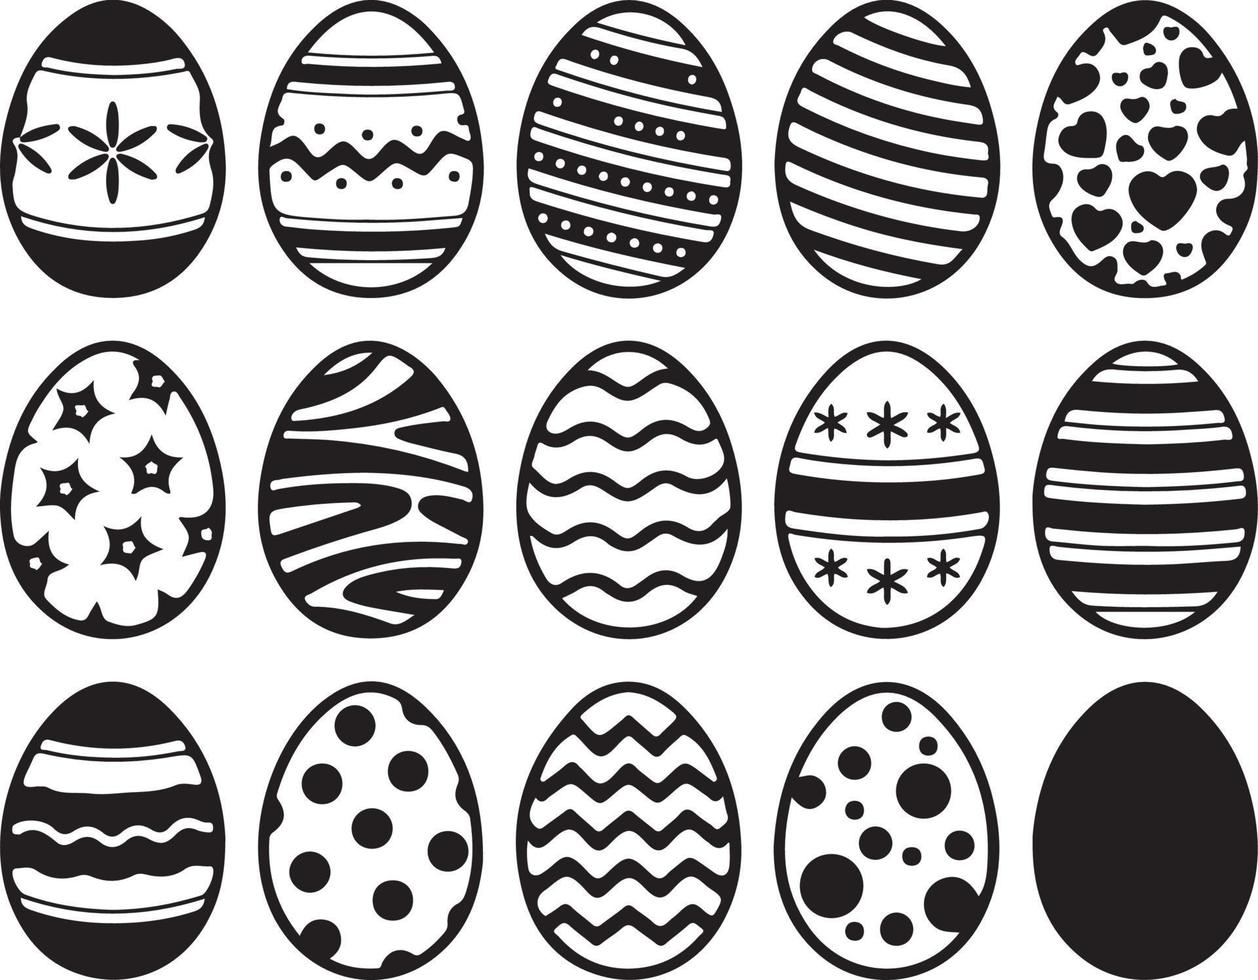 Black and white Easter eggs collection. Vector illustration for sticker, fabric, wrapping, banner, card, etc